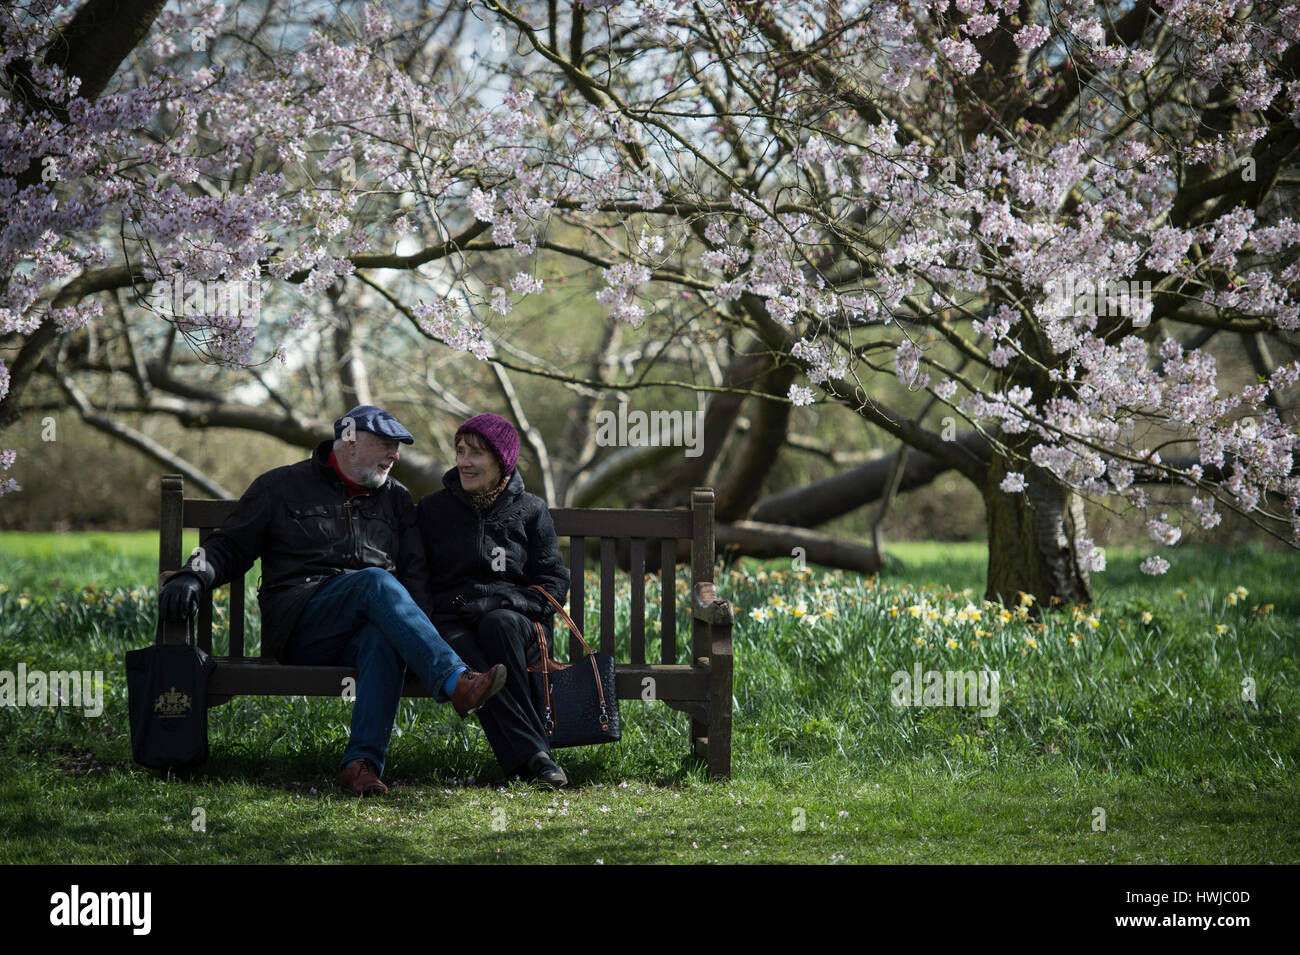 Bruce and Elsie (surnames not given) sit by a cherry blossom tree in Kew Gardens, south-west London. Stock Photo